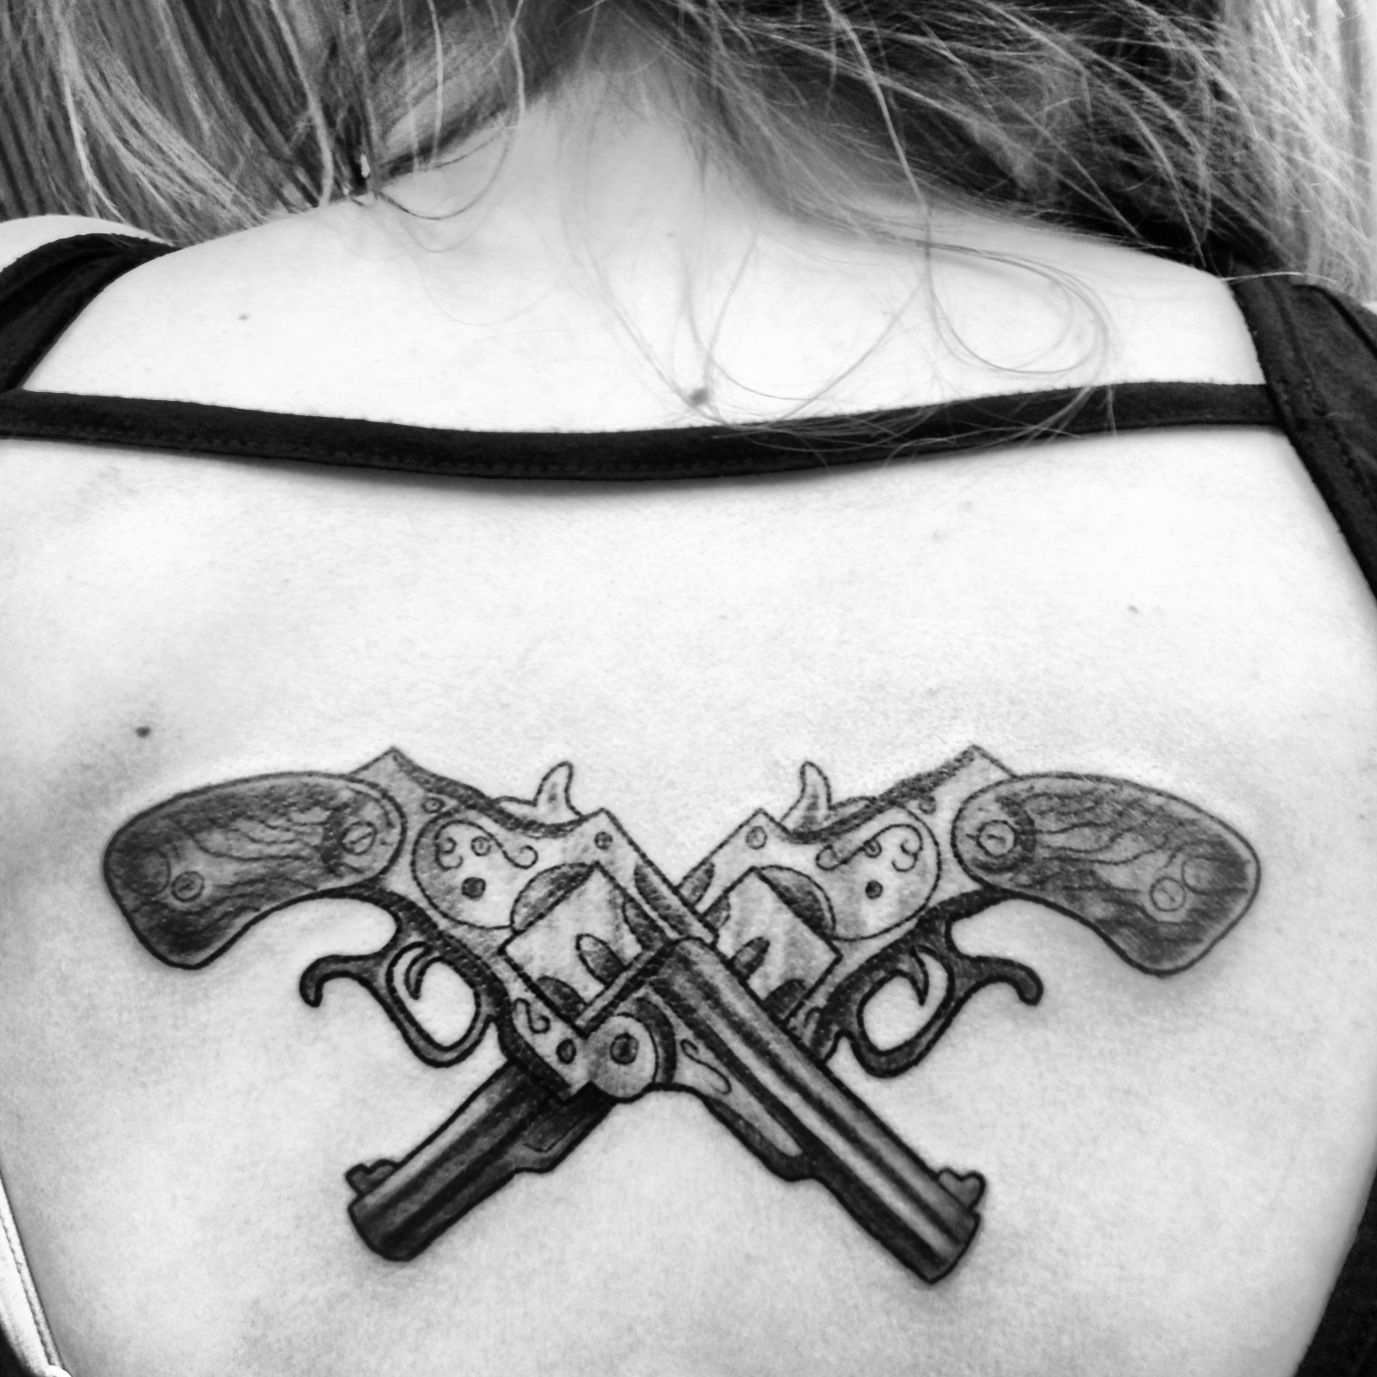 My First Tattoo Crossed Pistols Love Love Love It Tatted with size 1377 X 1377